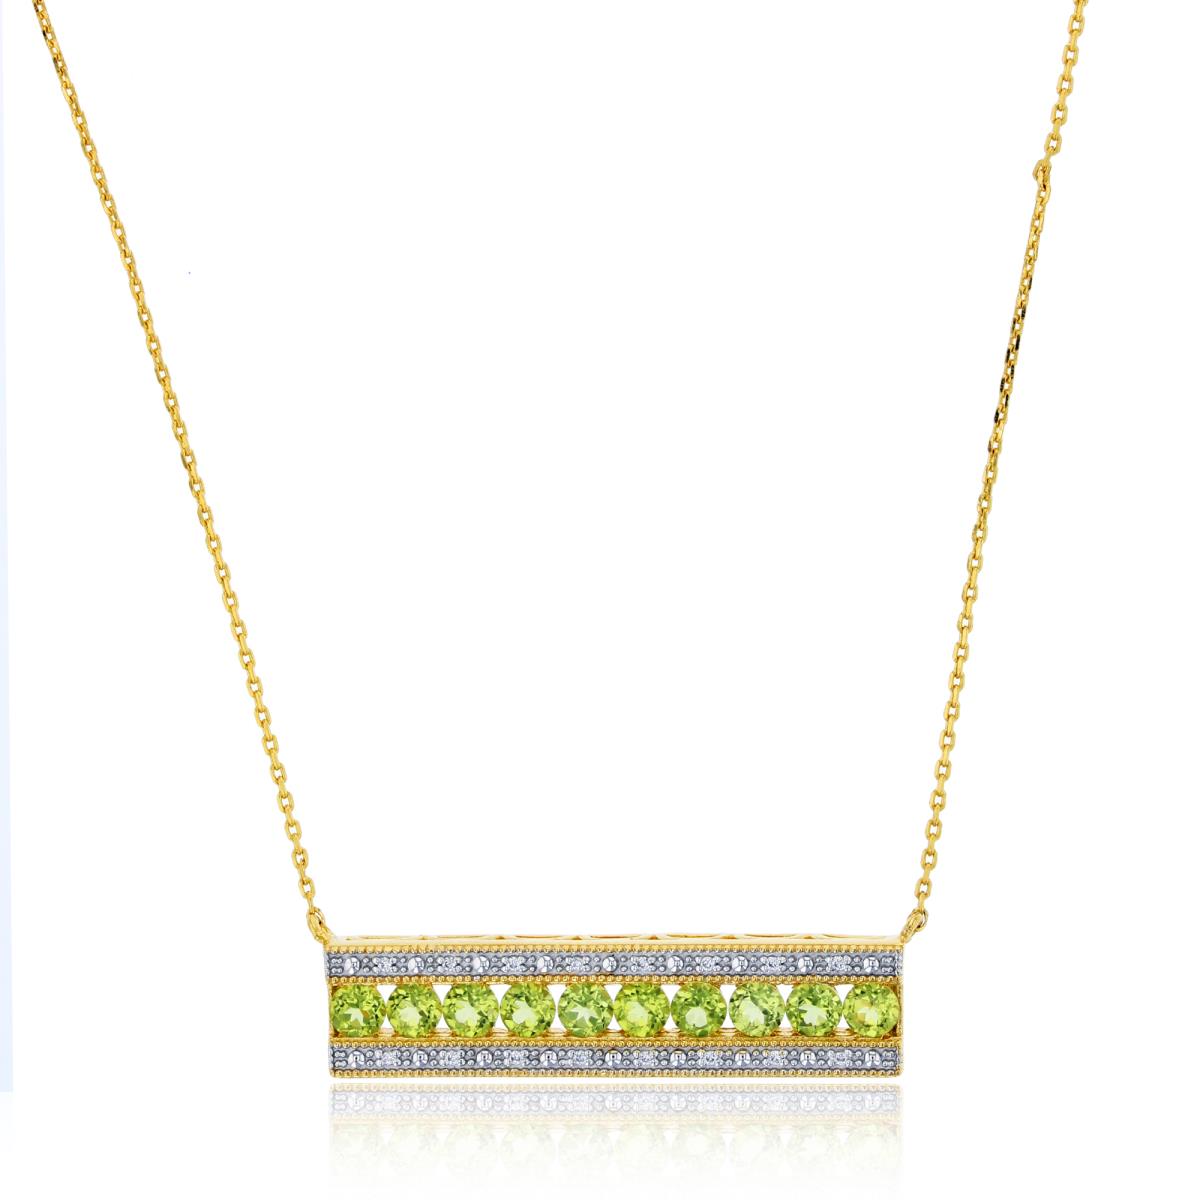 Sterling Silver+1Micron 14k Yellow Gold Rnd CZ (0.048cttw) & 3mm Rnd Peridot Bar 17" Necklace